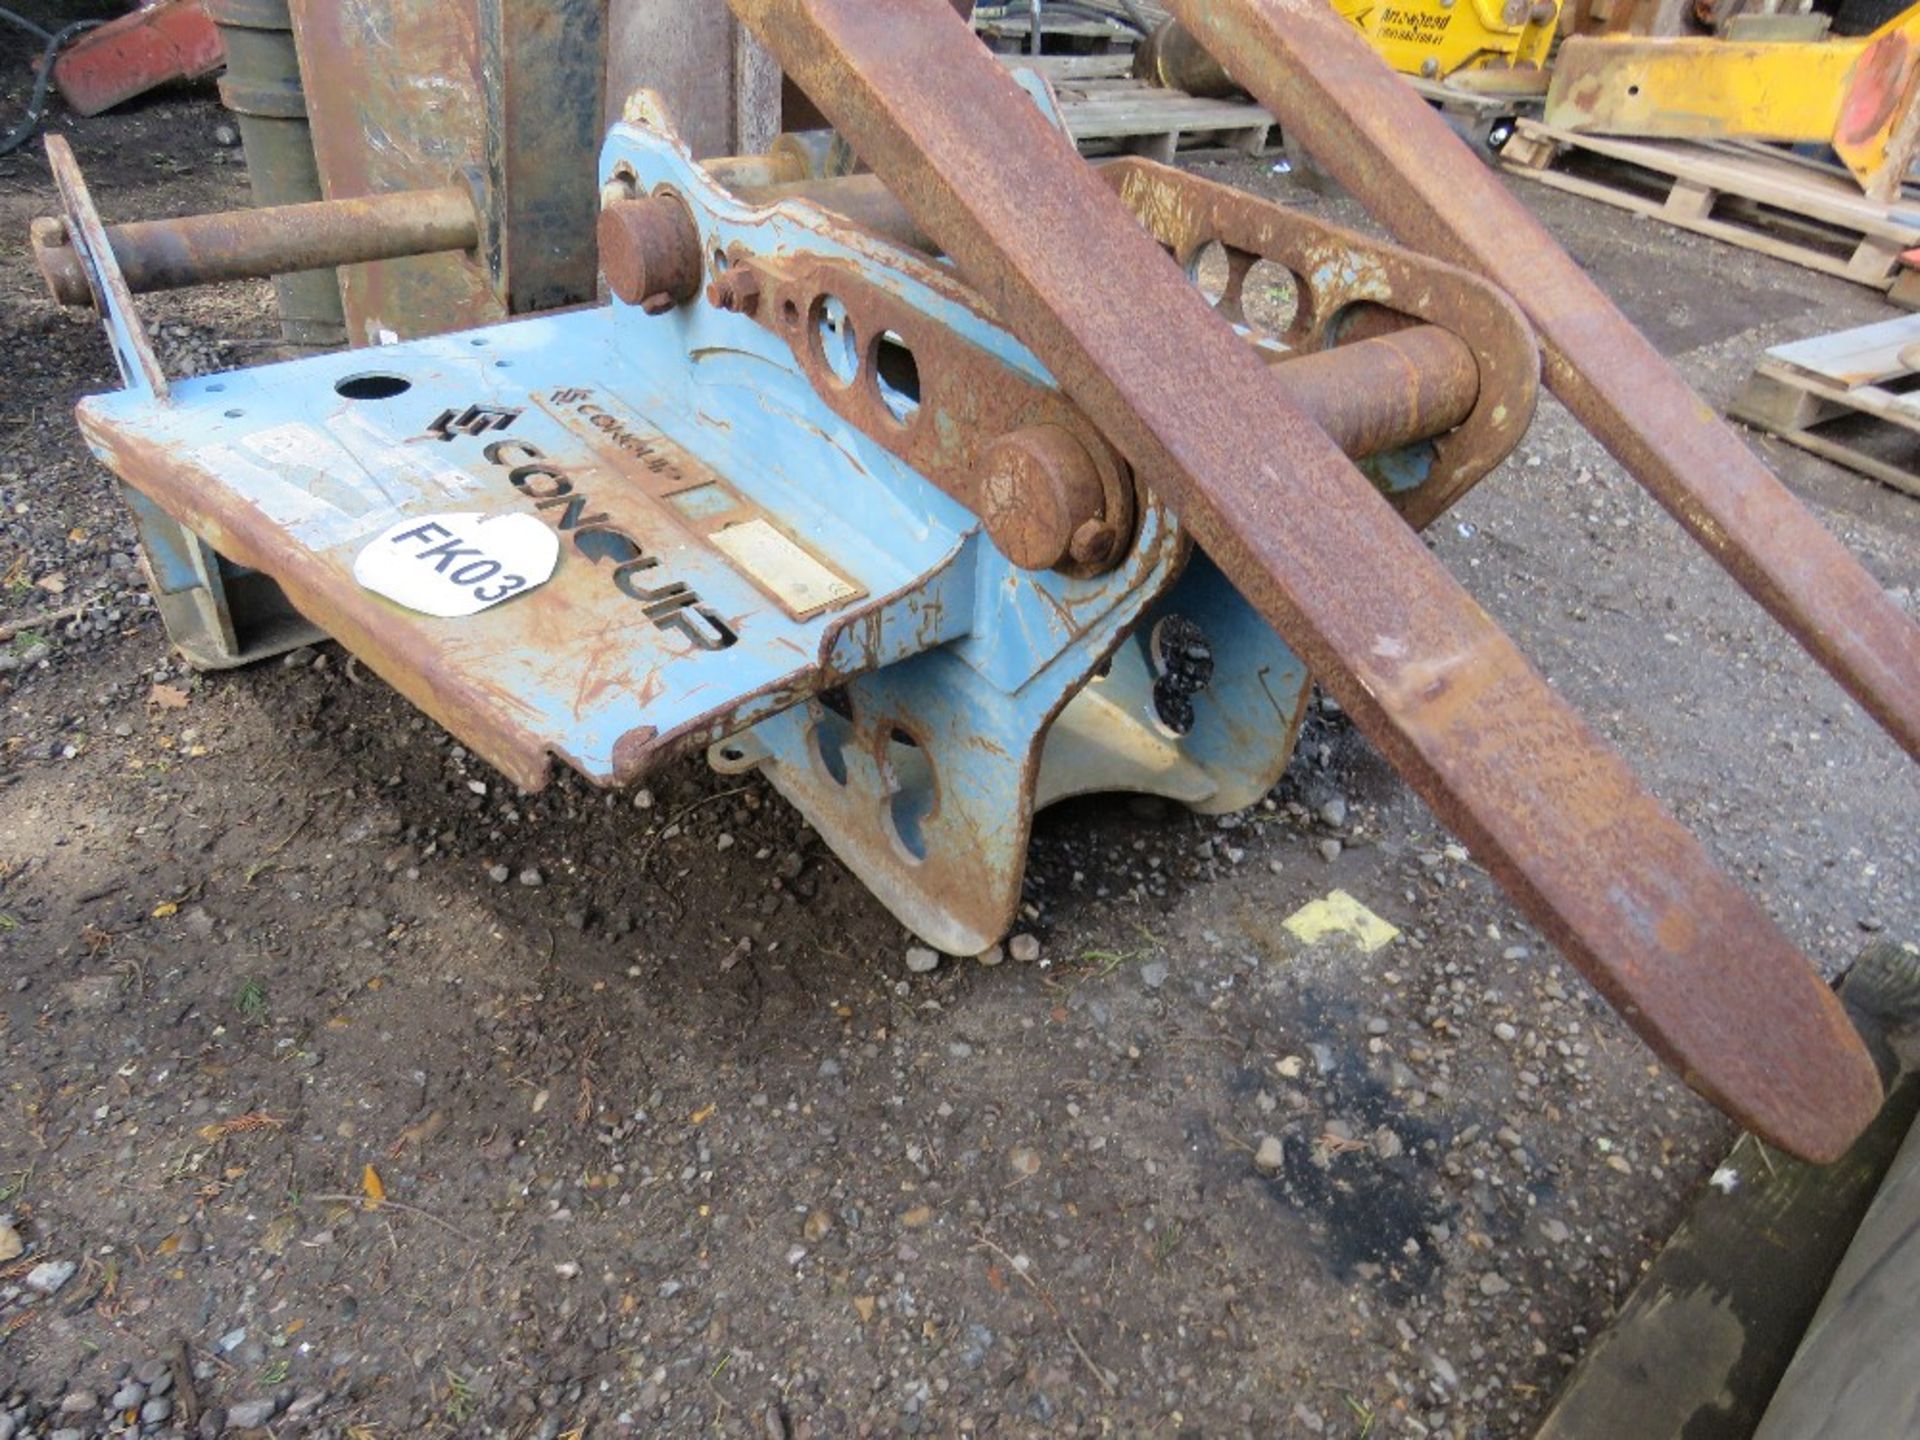 SET OF CONQUIP EXCAVATOR MOUNTED PALLET FORKS. SOURCED FROM COMPANY LIQUIDATION. - Image 5 of 6